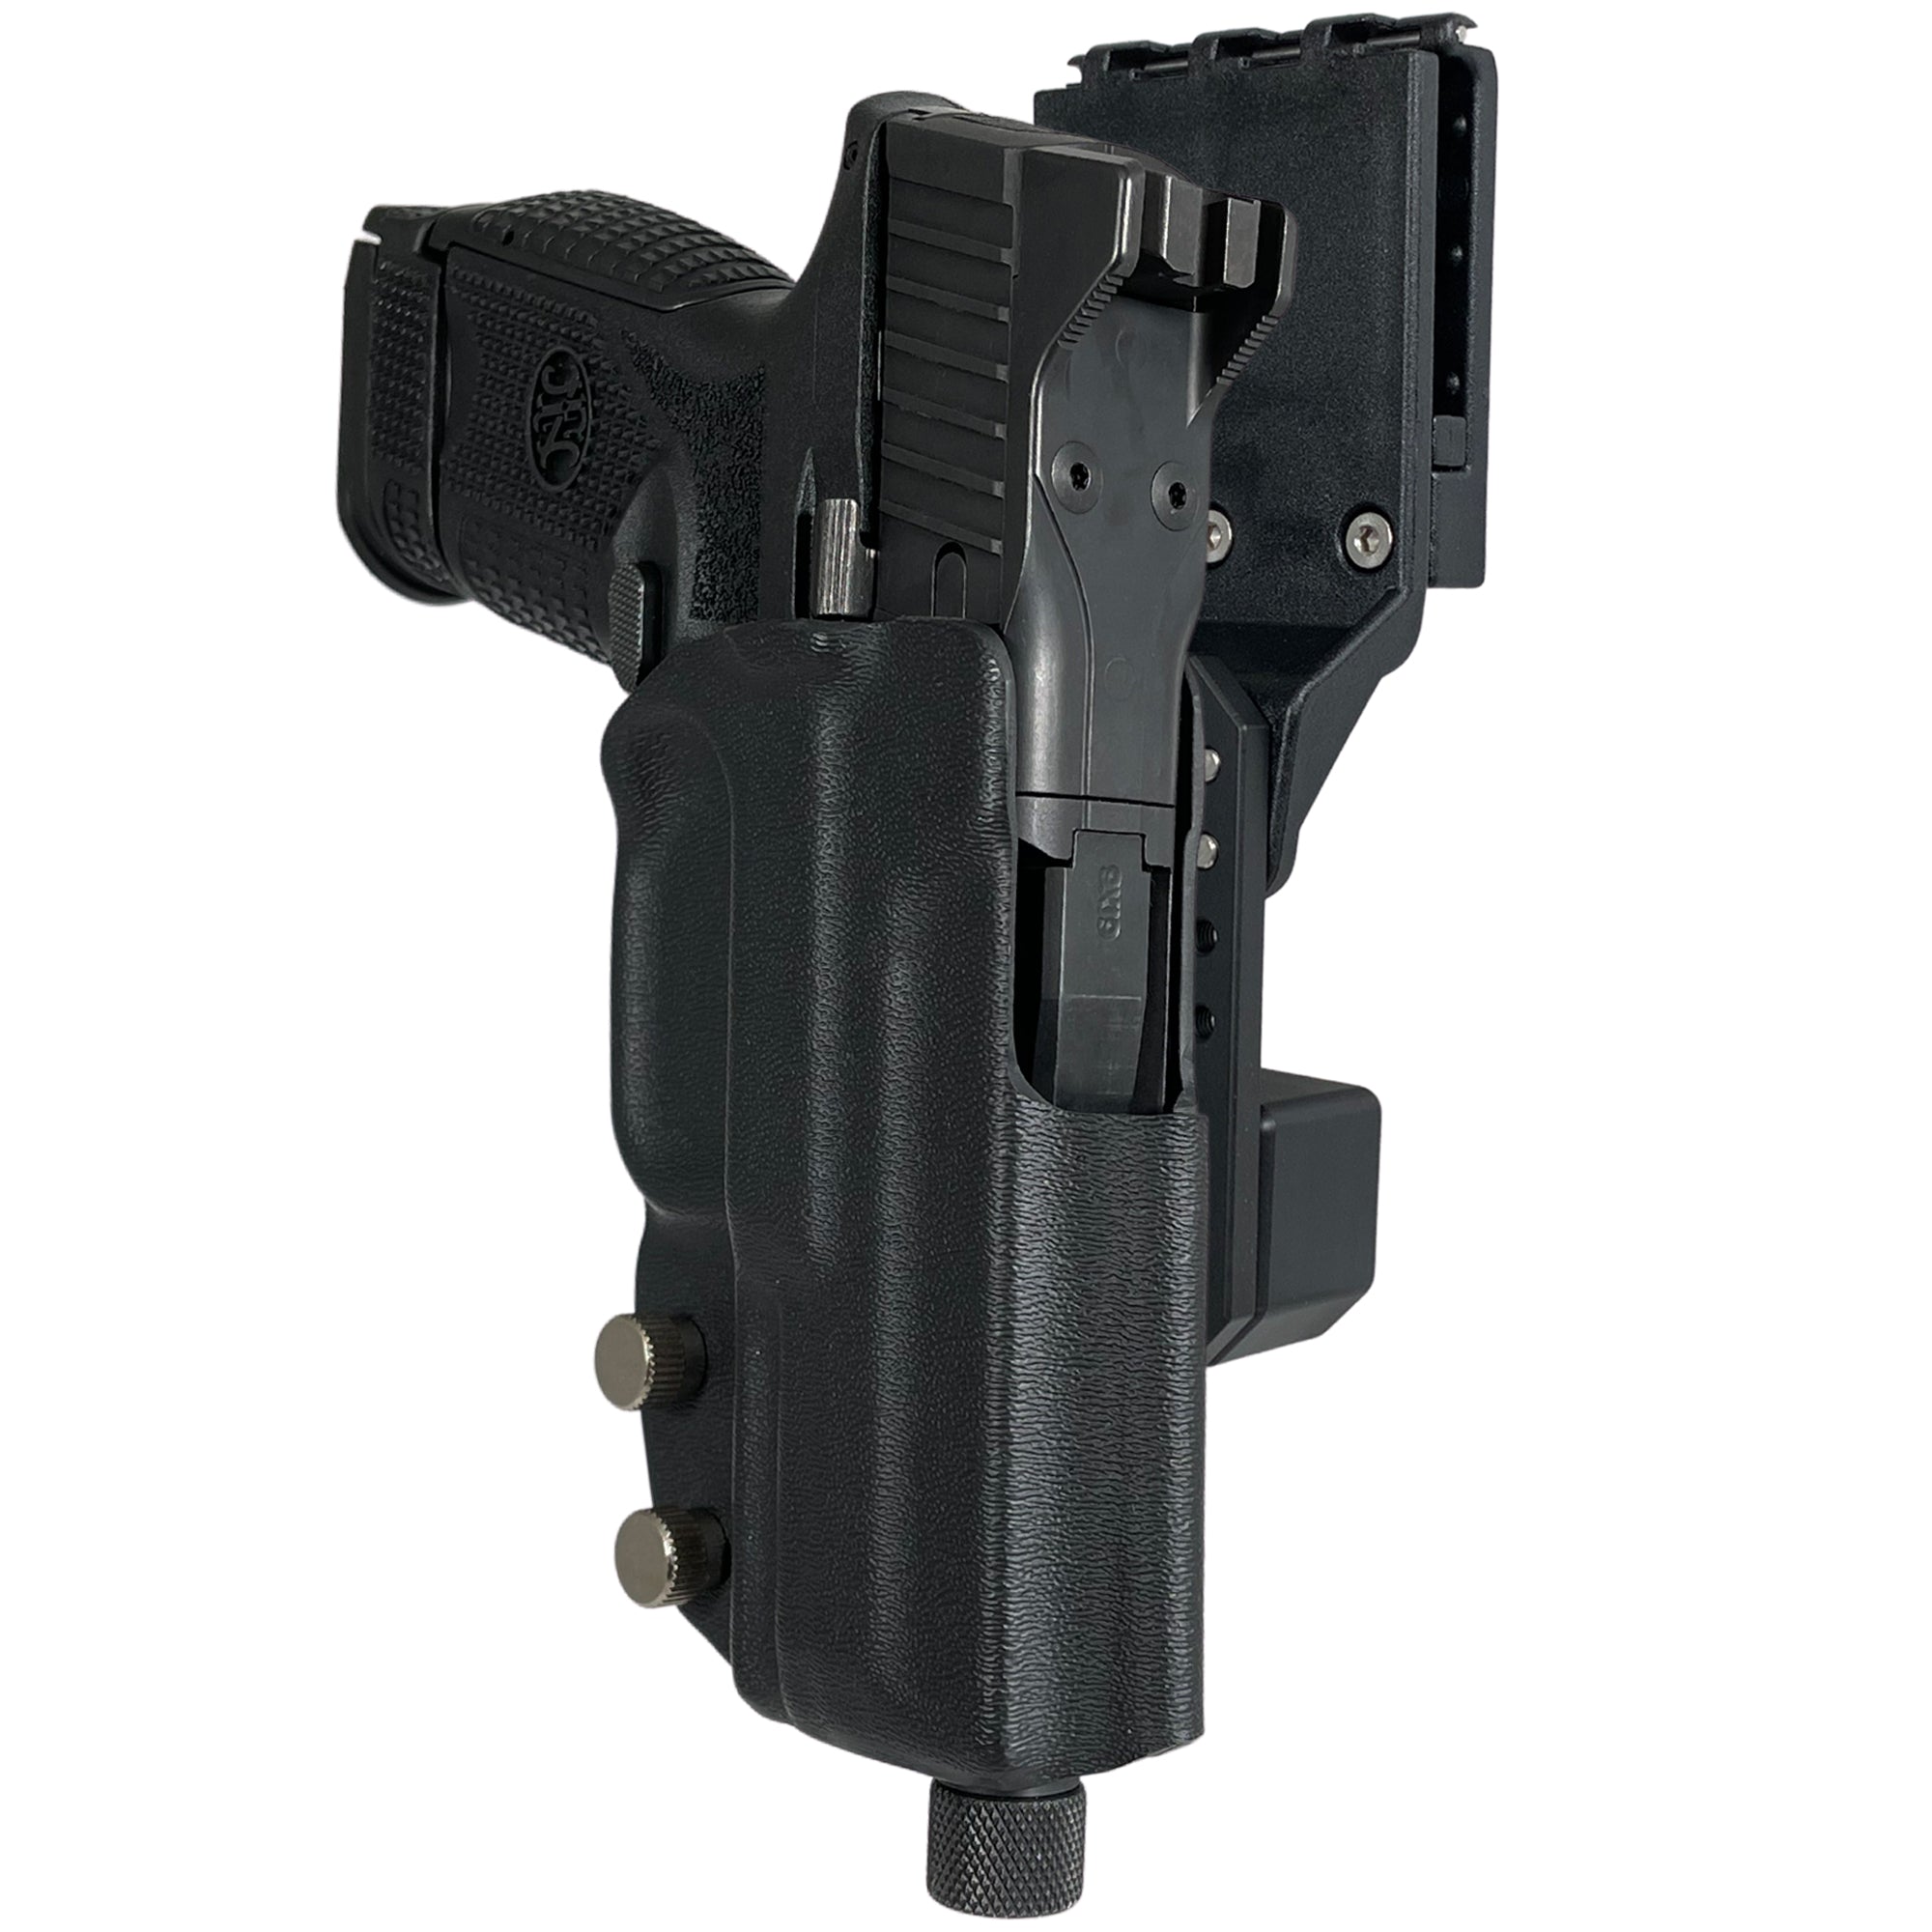 FNH 509 Compact/Midsize Pro Competition Holster